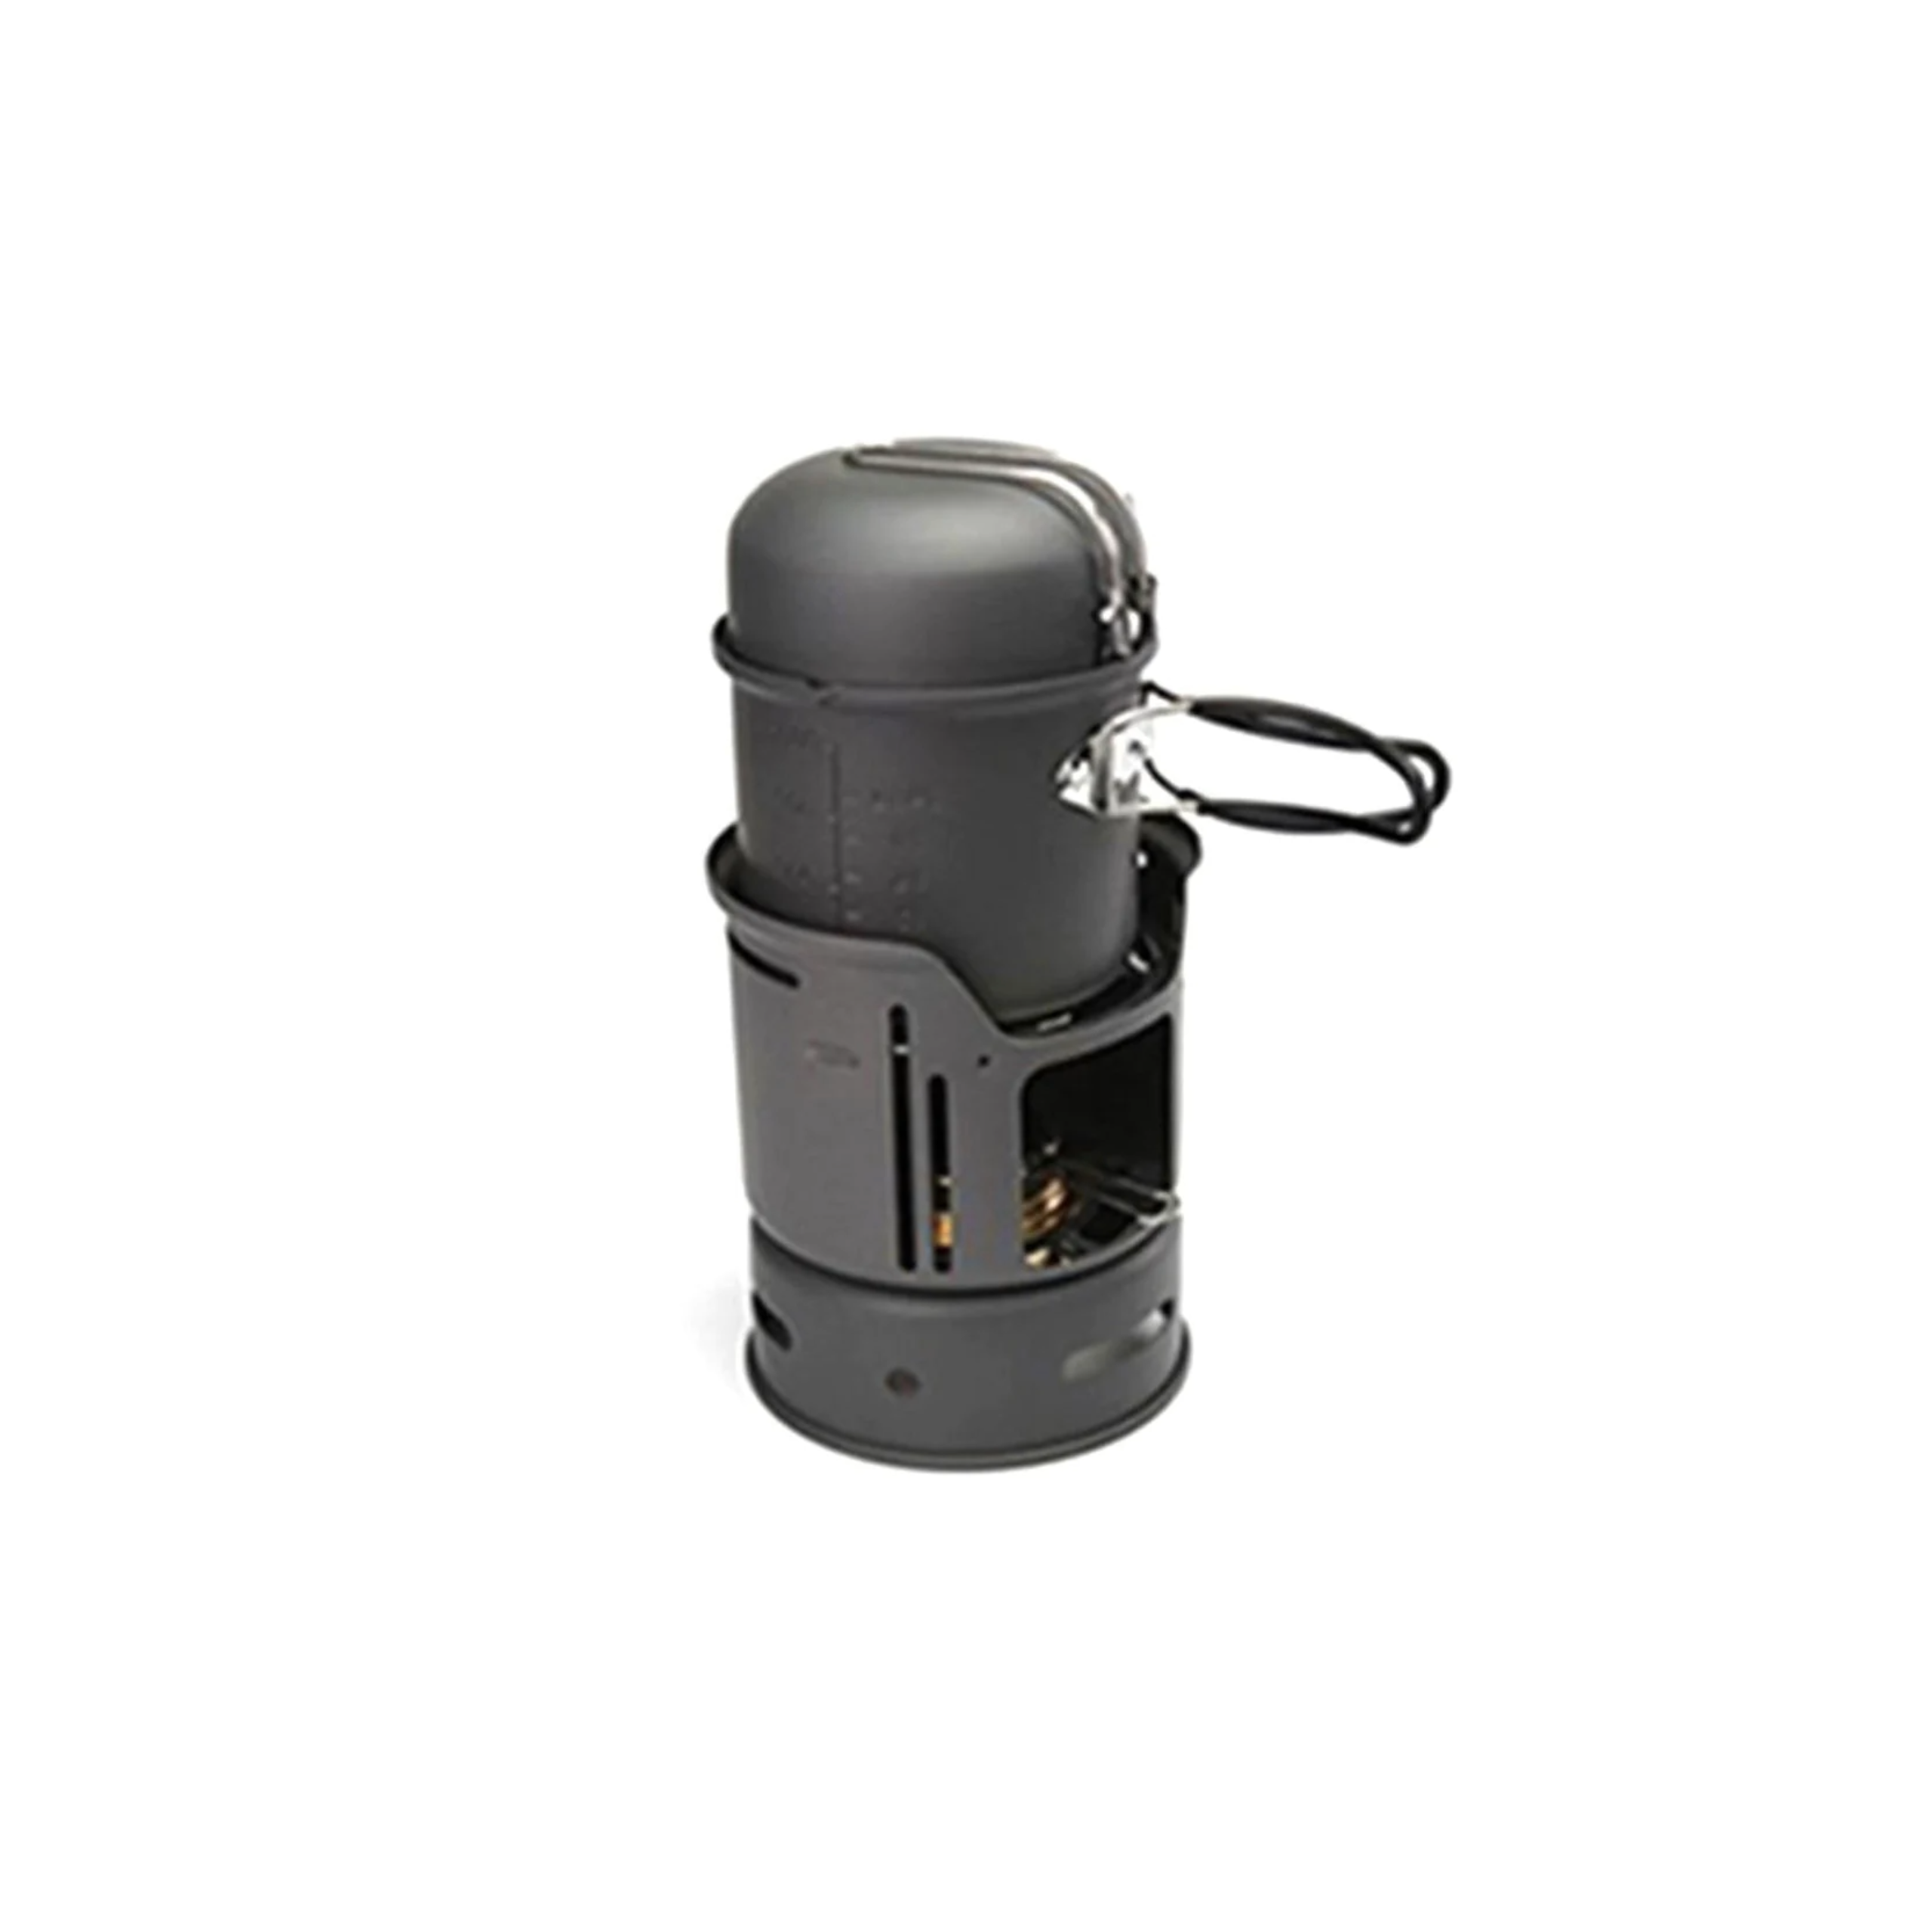 ALOCS Camping Pot 7-piece Camping Pot Set For 1-2 Persons For Hiking Self-drivin